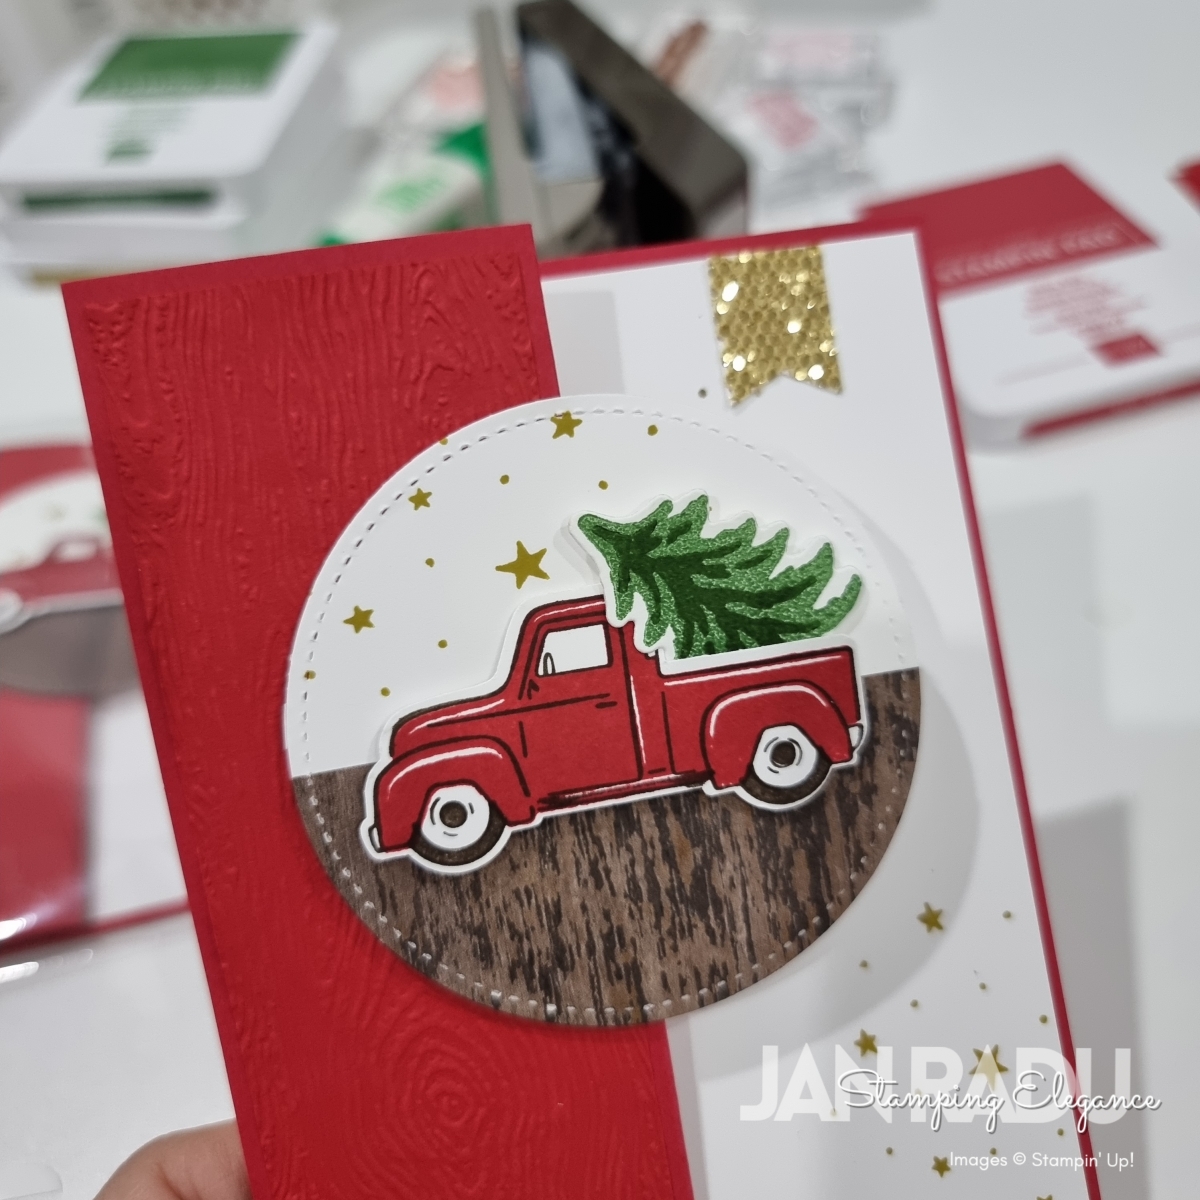 Christmas Crafting and Corporate Team-Building